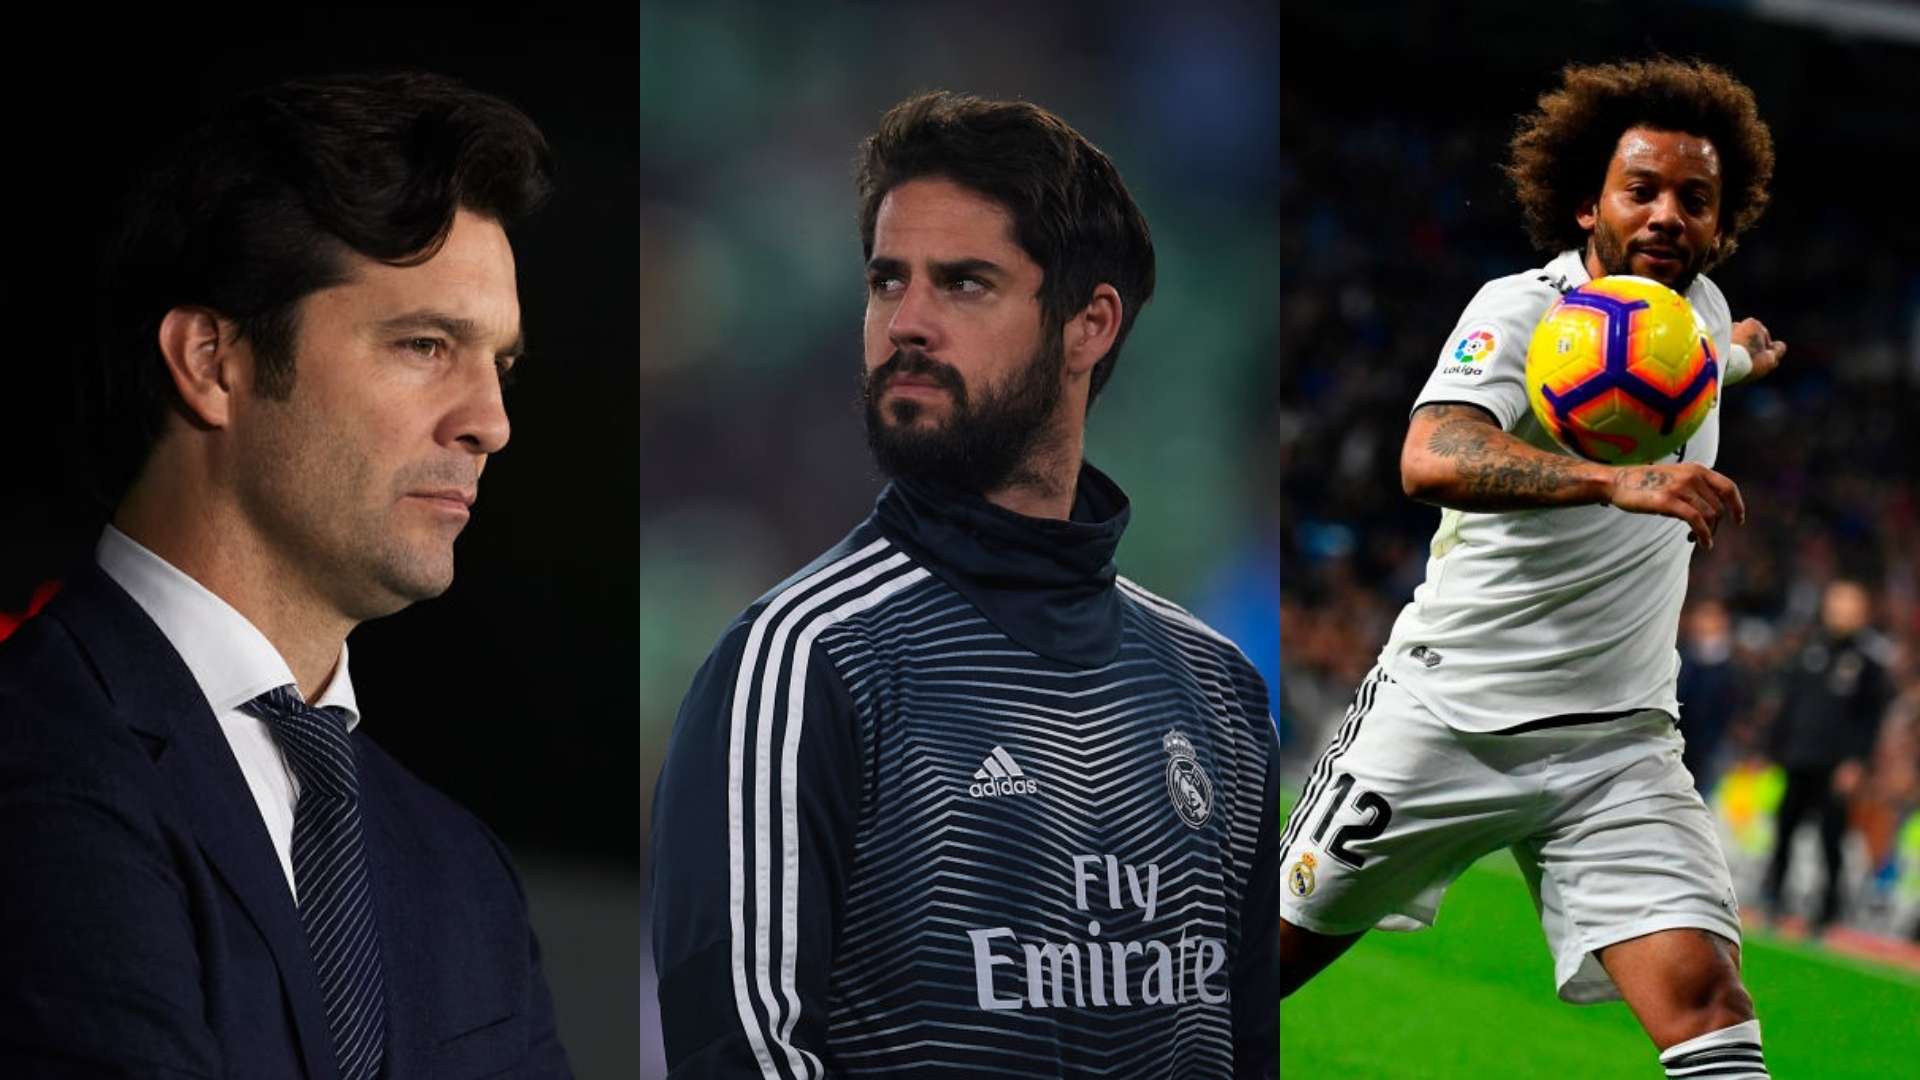 GFX Info Solari, Isco and Marcelo with Real Madrid